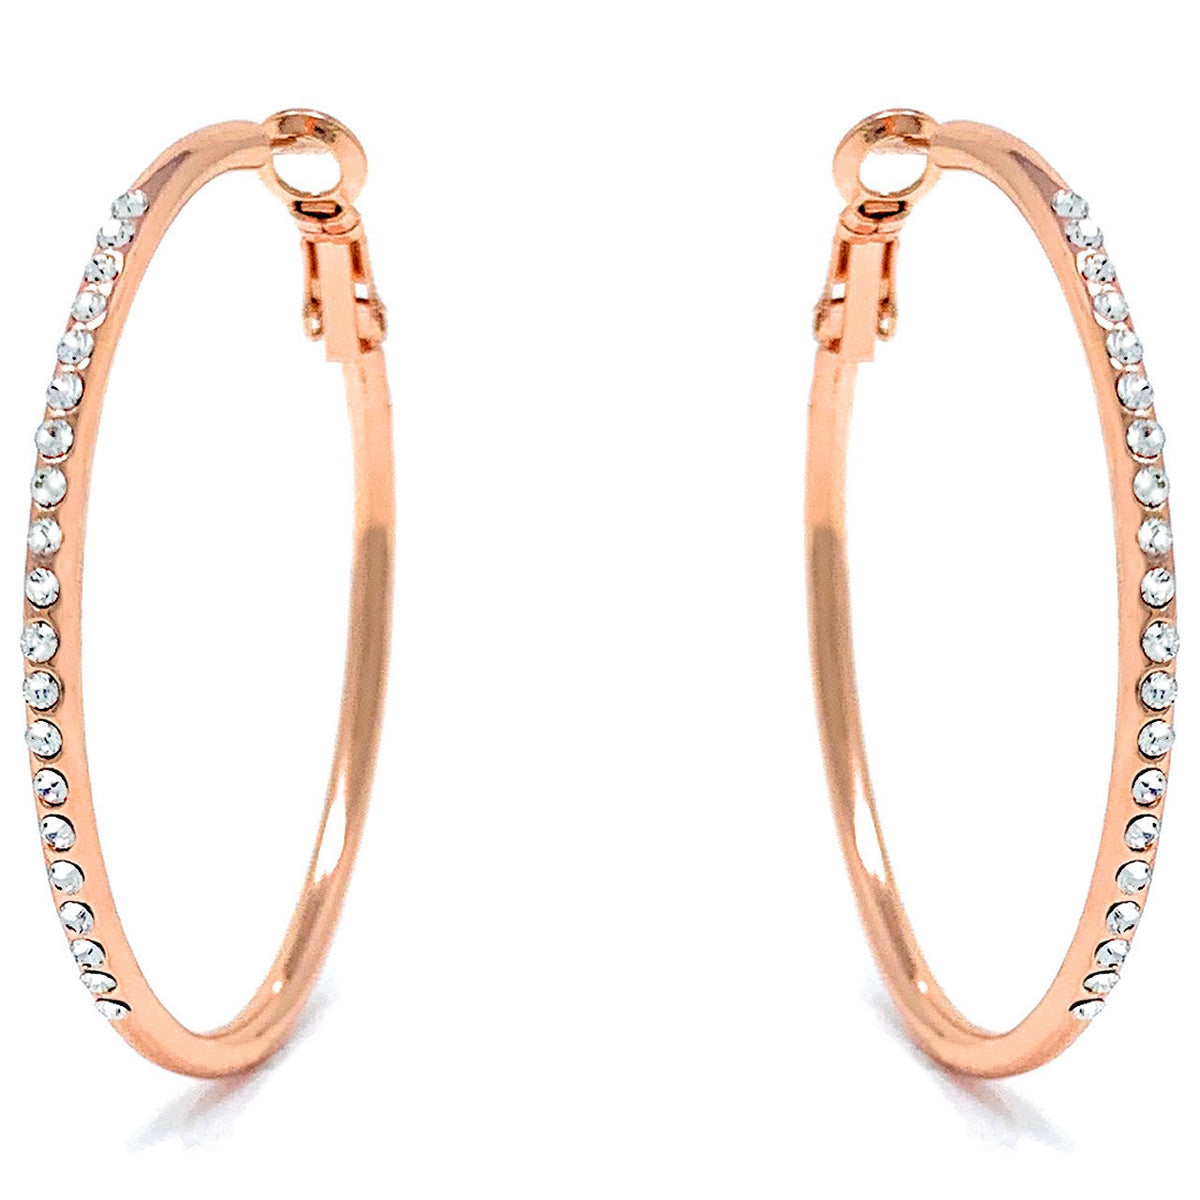 Amelia Large Pave Hoop Earrings with White Clear Round Crystals from Swarovski Rose Gold Plated - Ed Heart